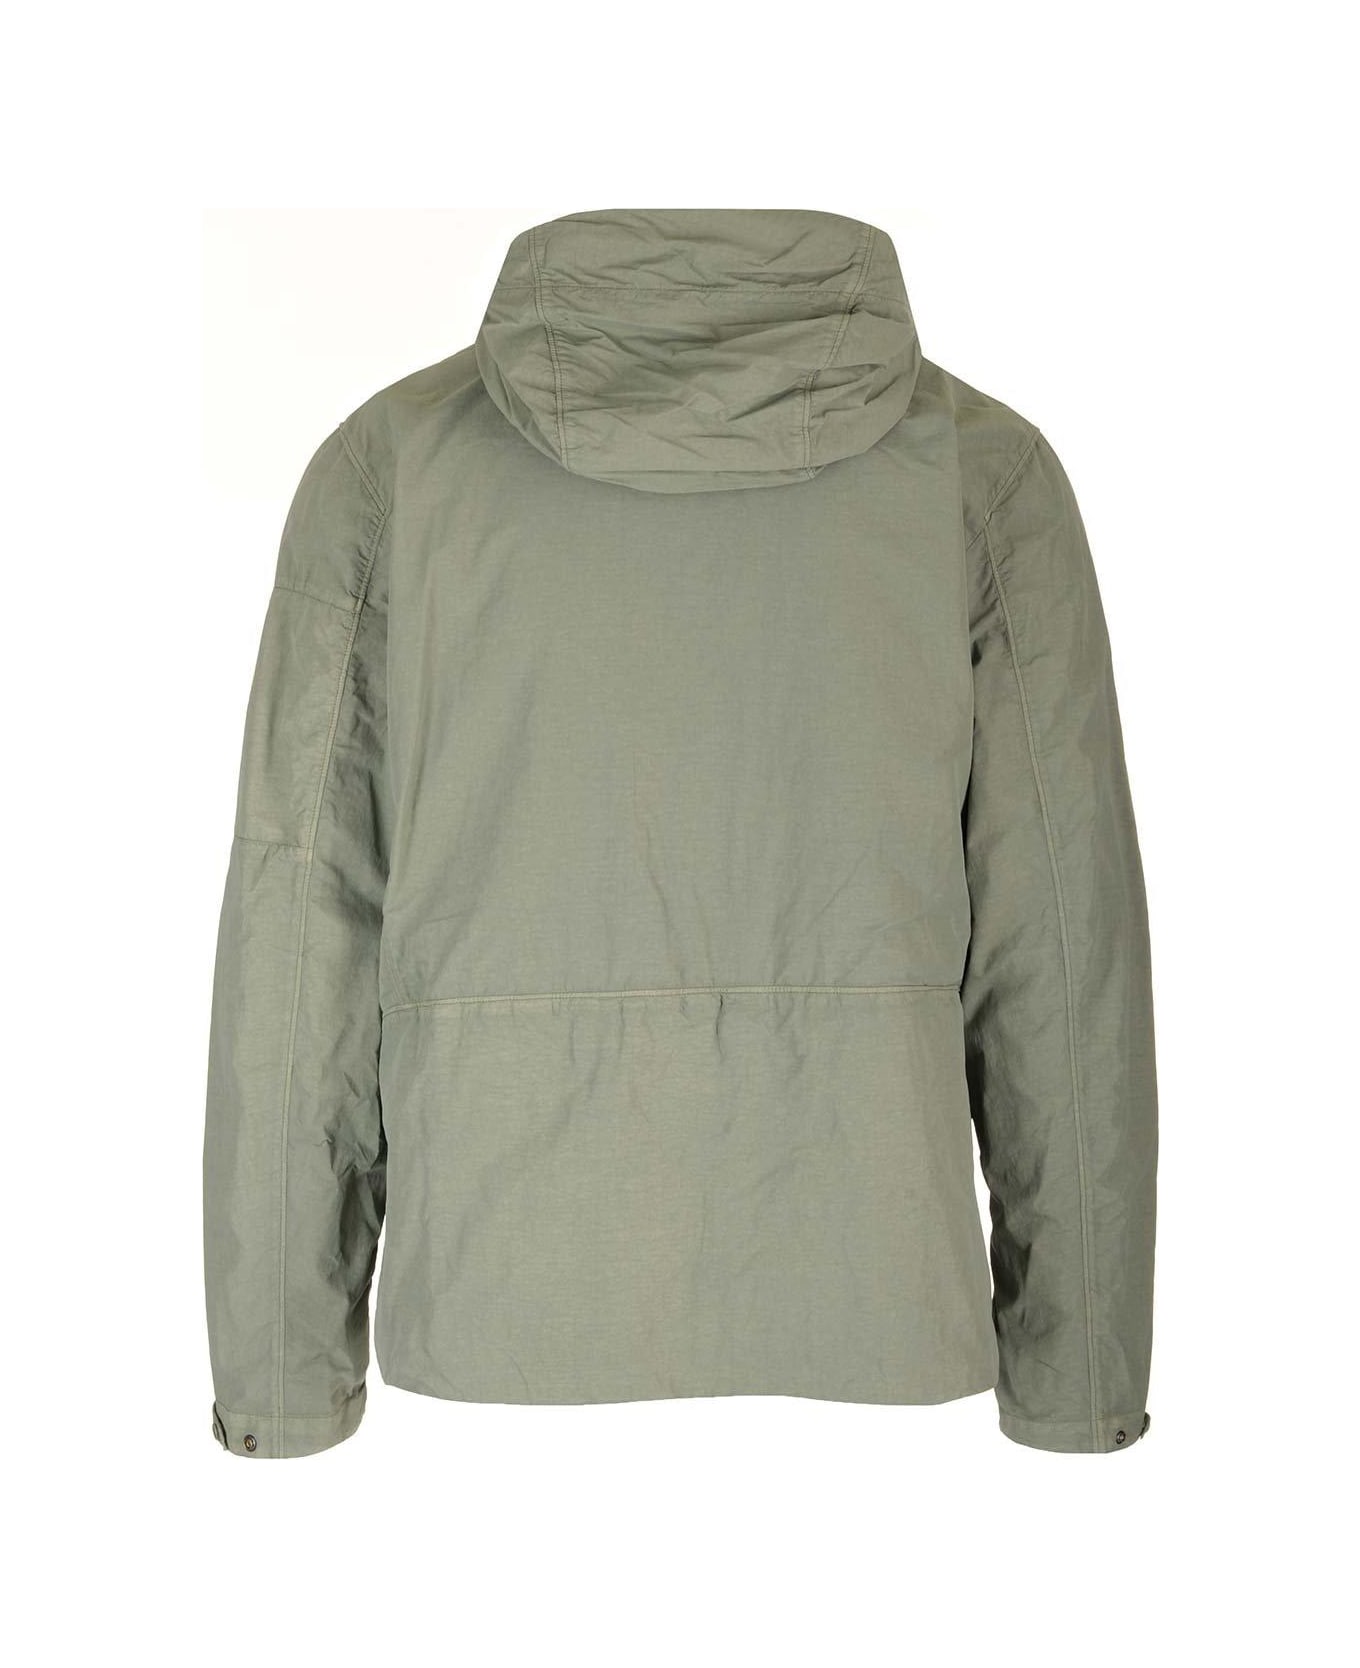 C.P. Company Reversible Hooded Jacket - Agave